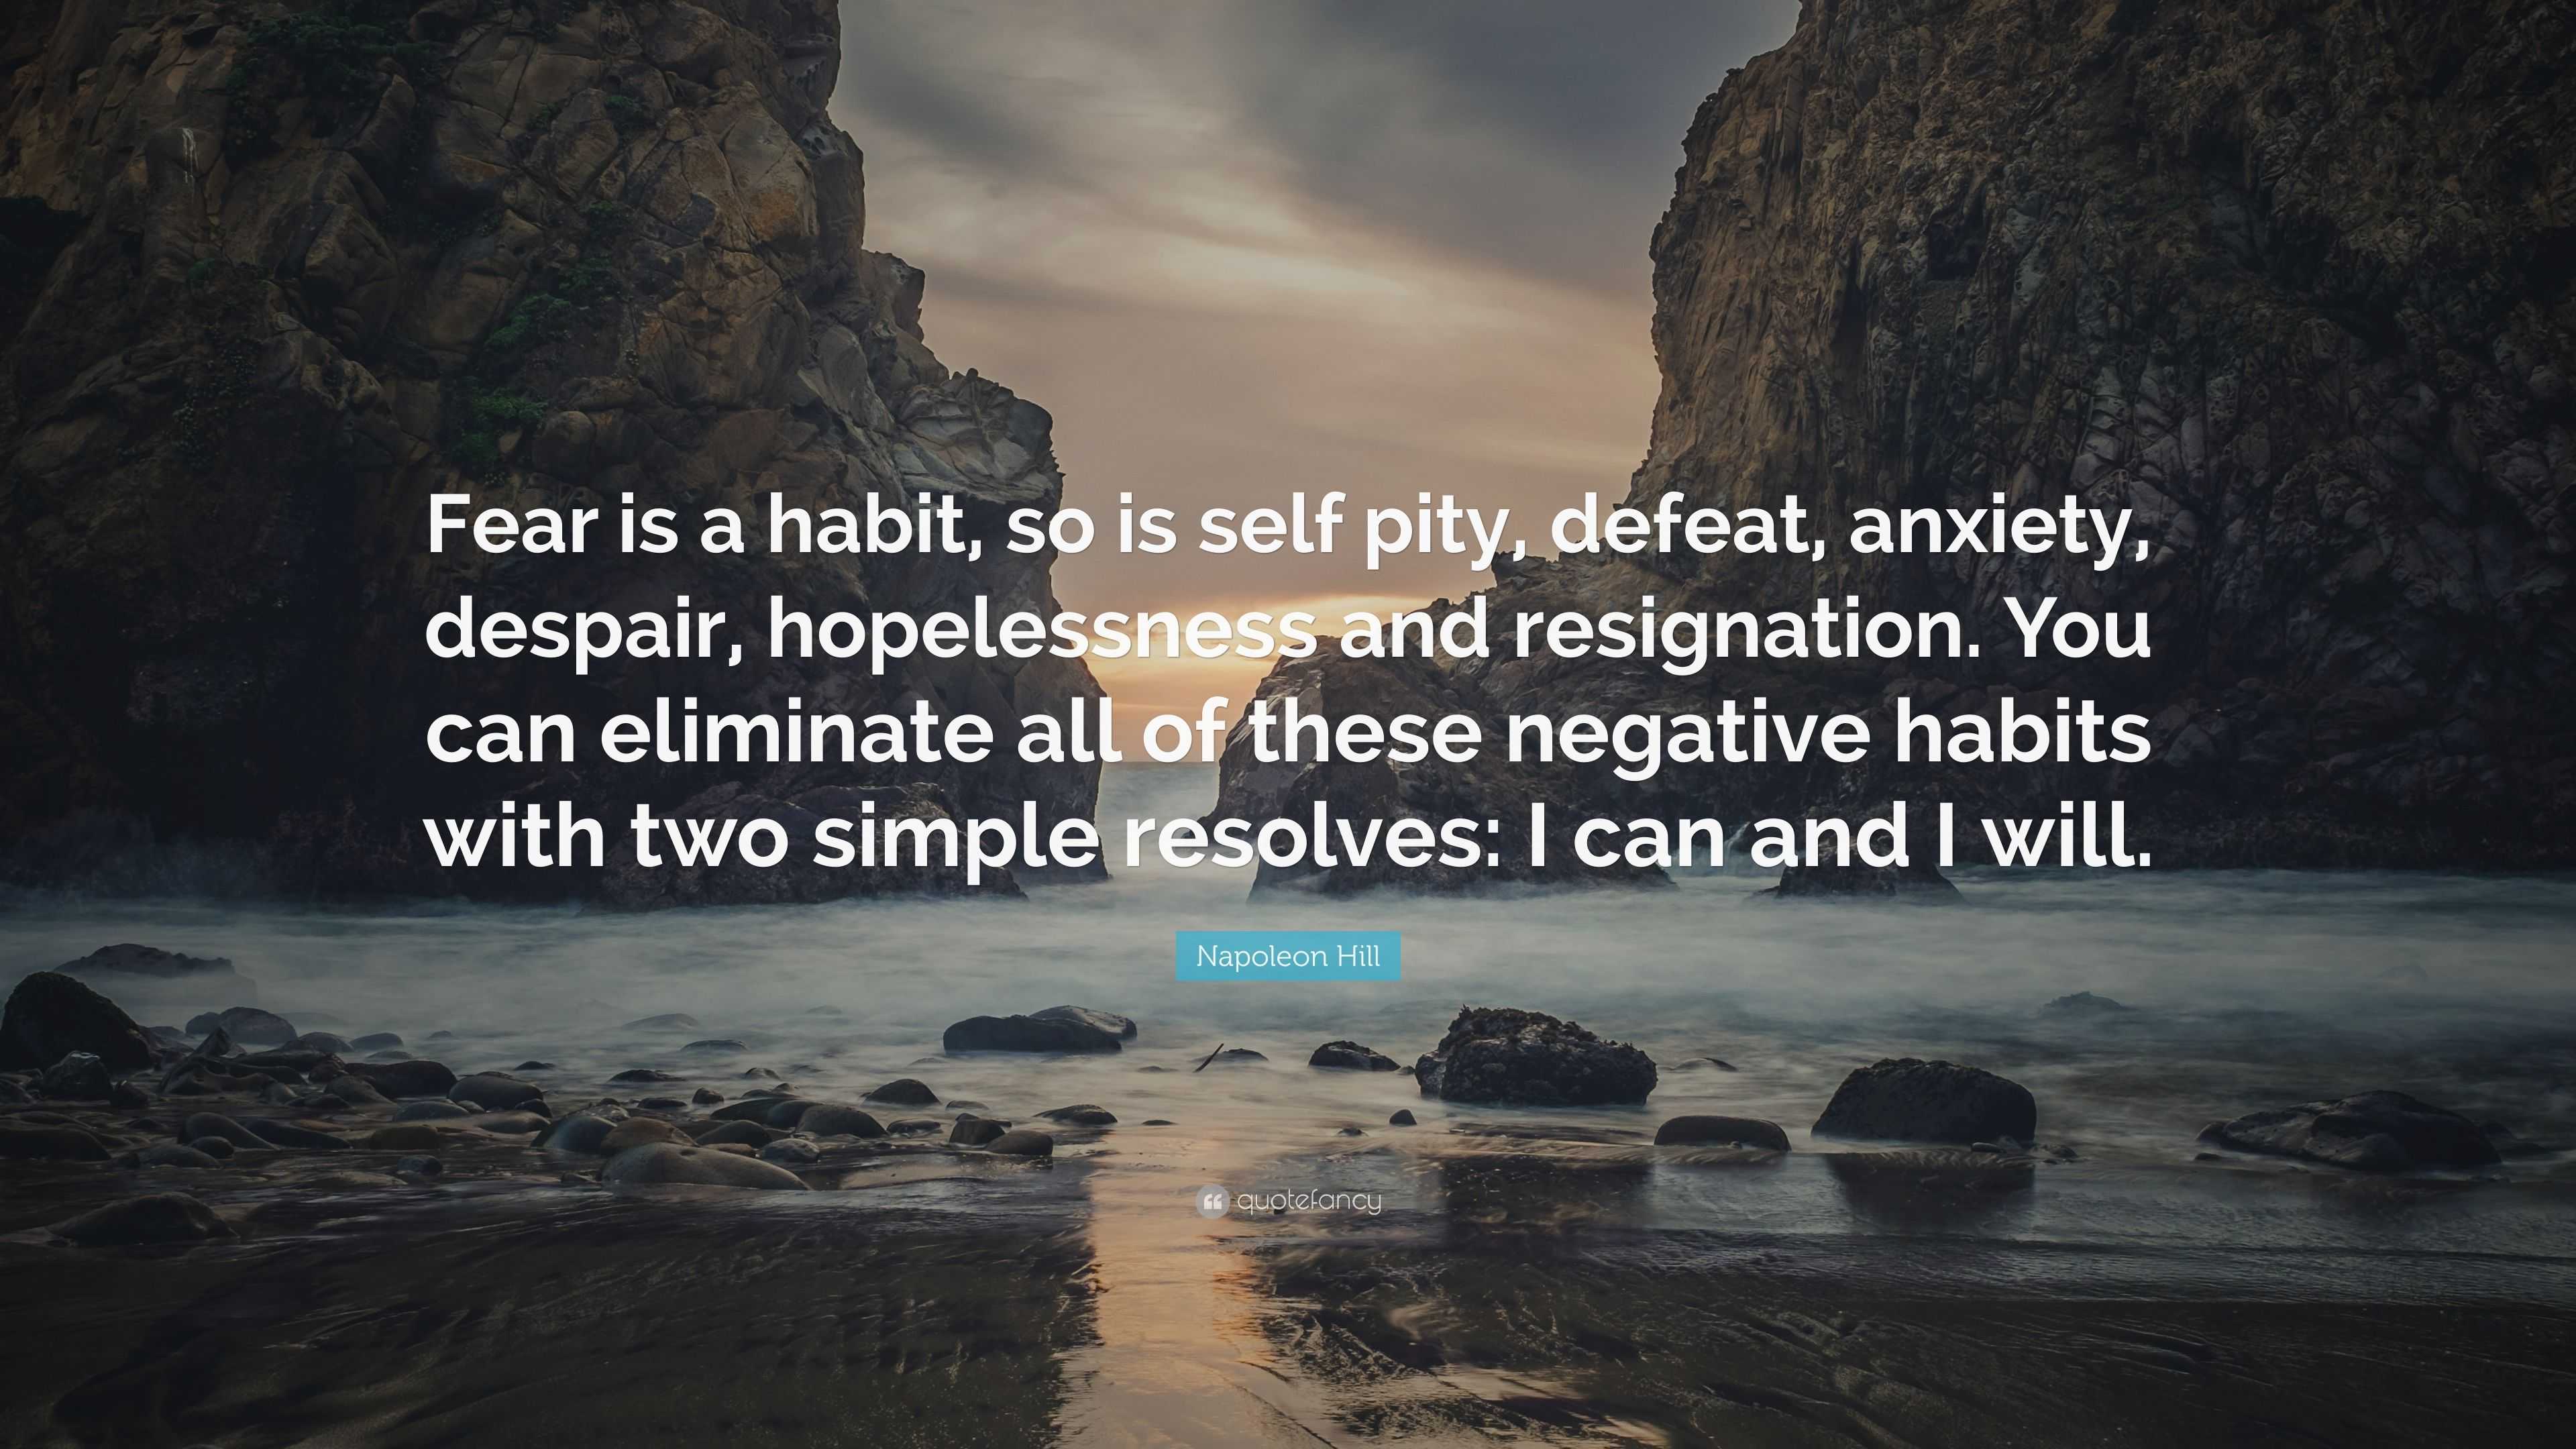 Napoleon Hill Quote: “Fear is a habit, so is self pity, defeat, anxiety